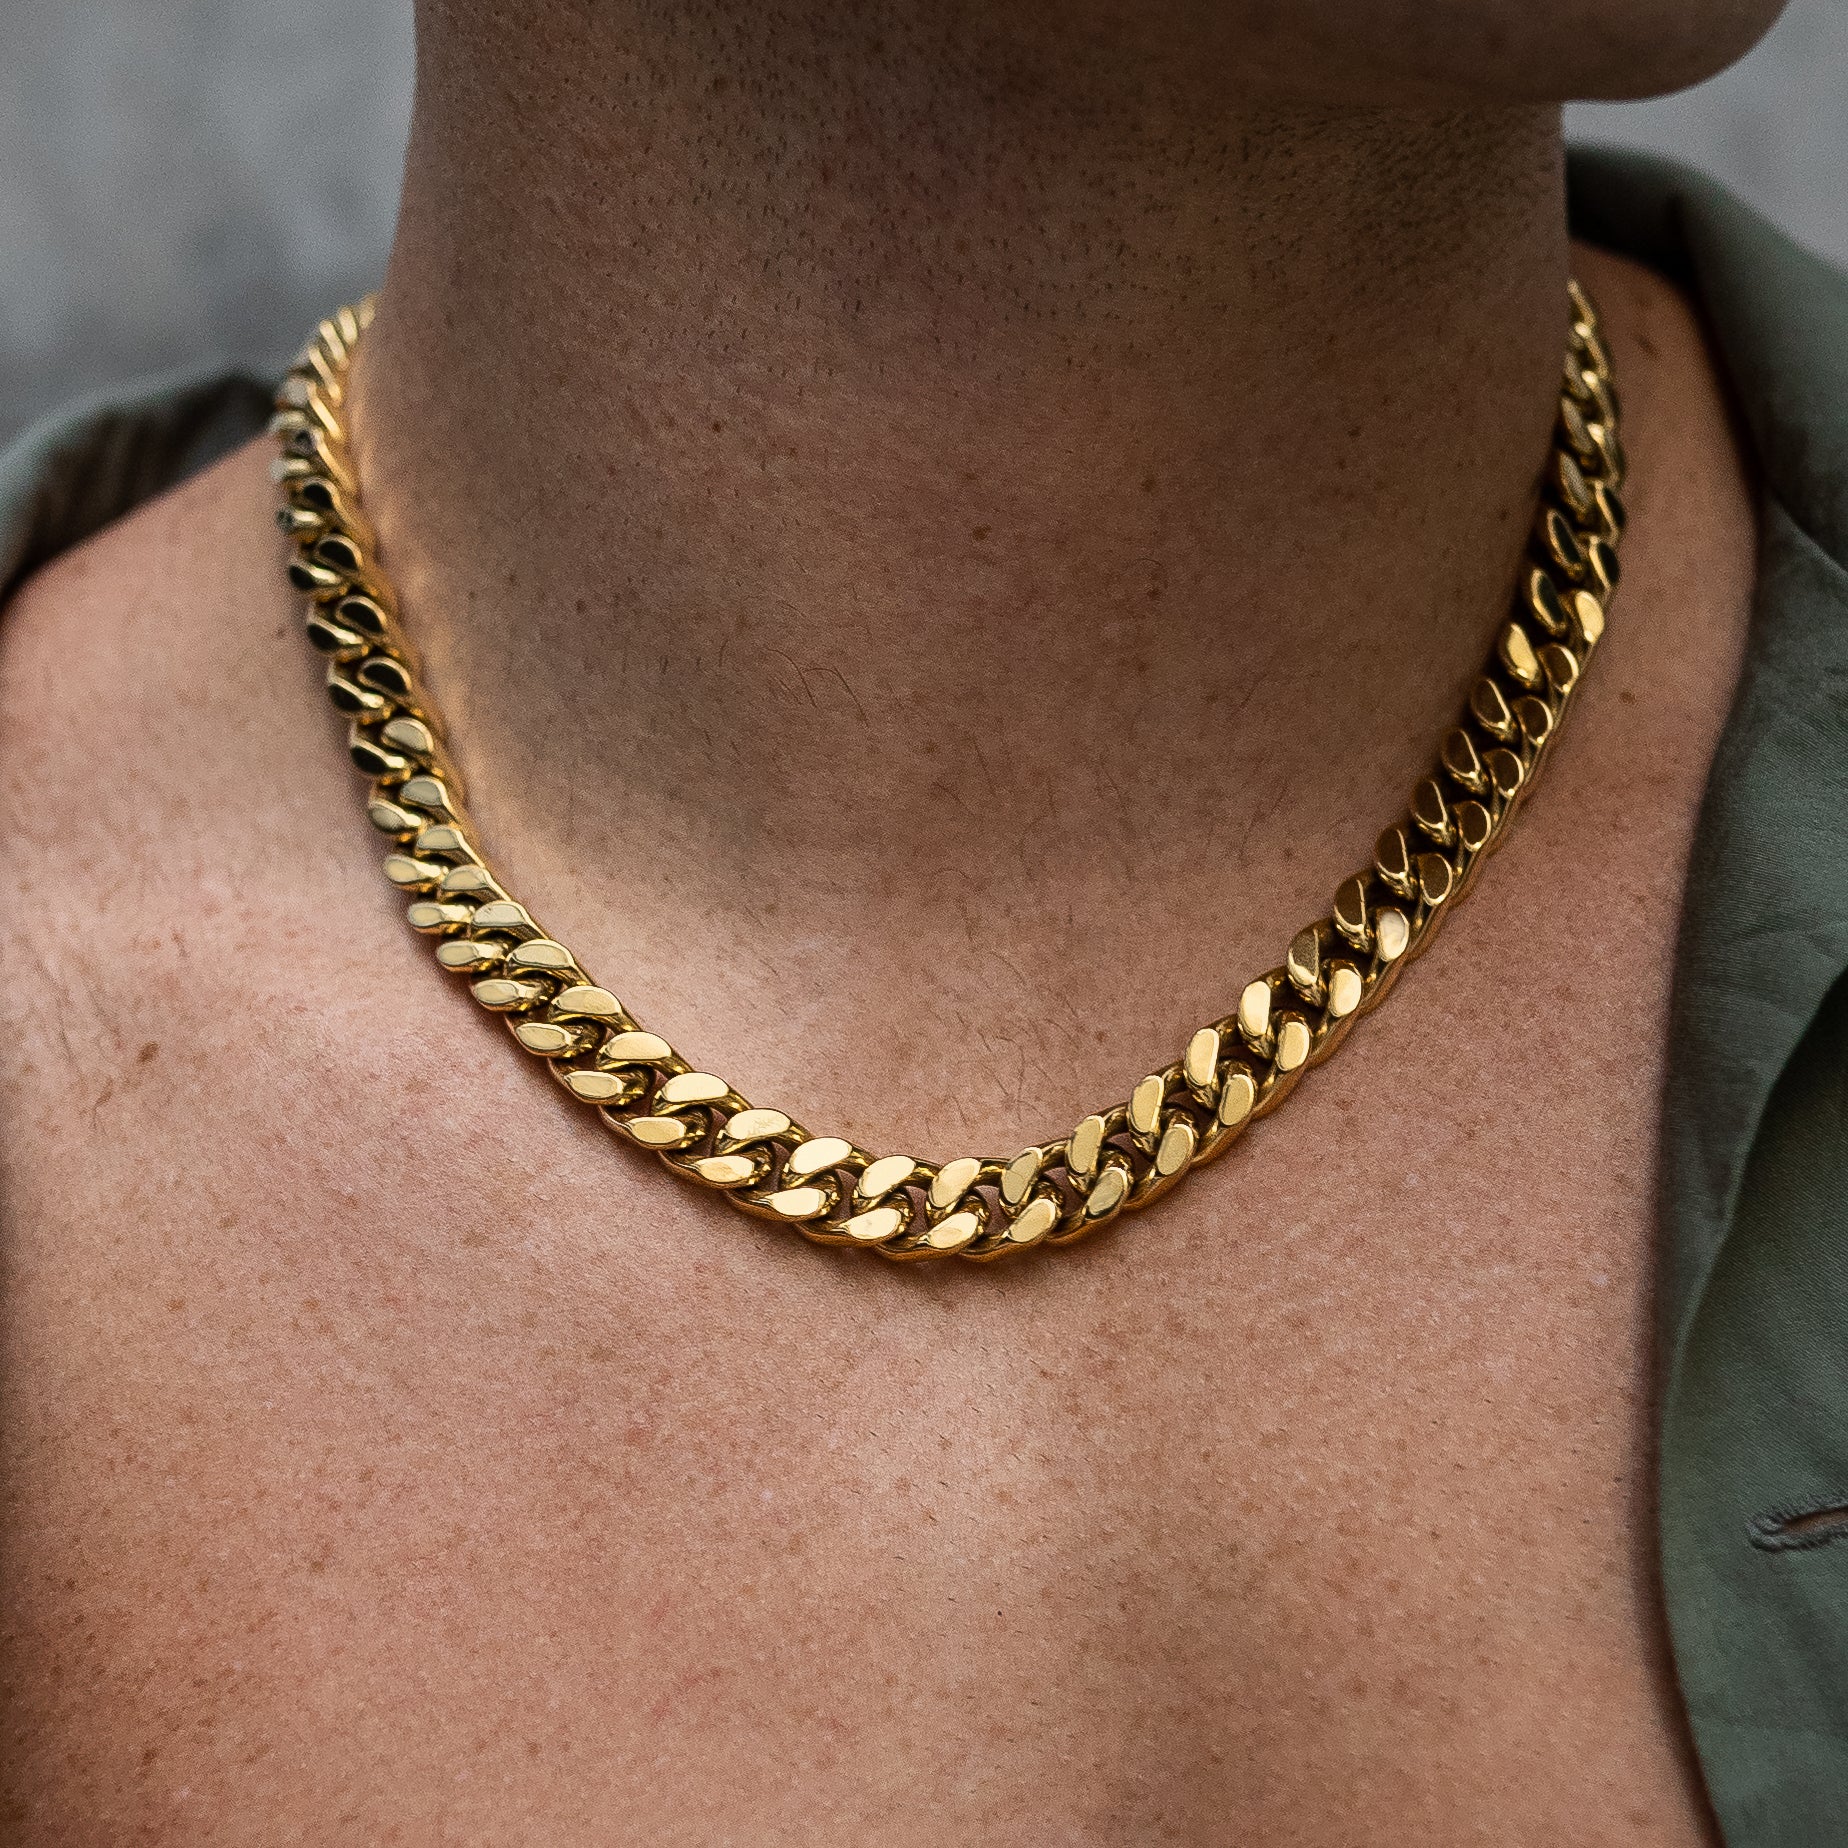 Our Guide on How Much Is 18k Gold Chain Worth in Your Gold Jewelry Collection